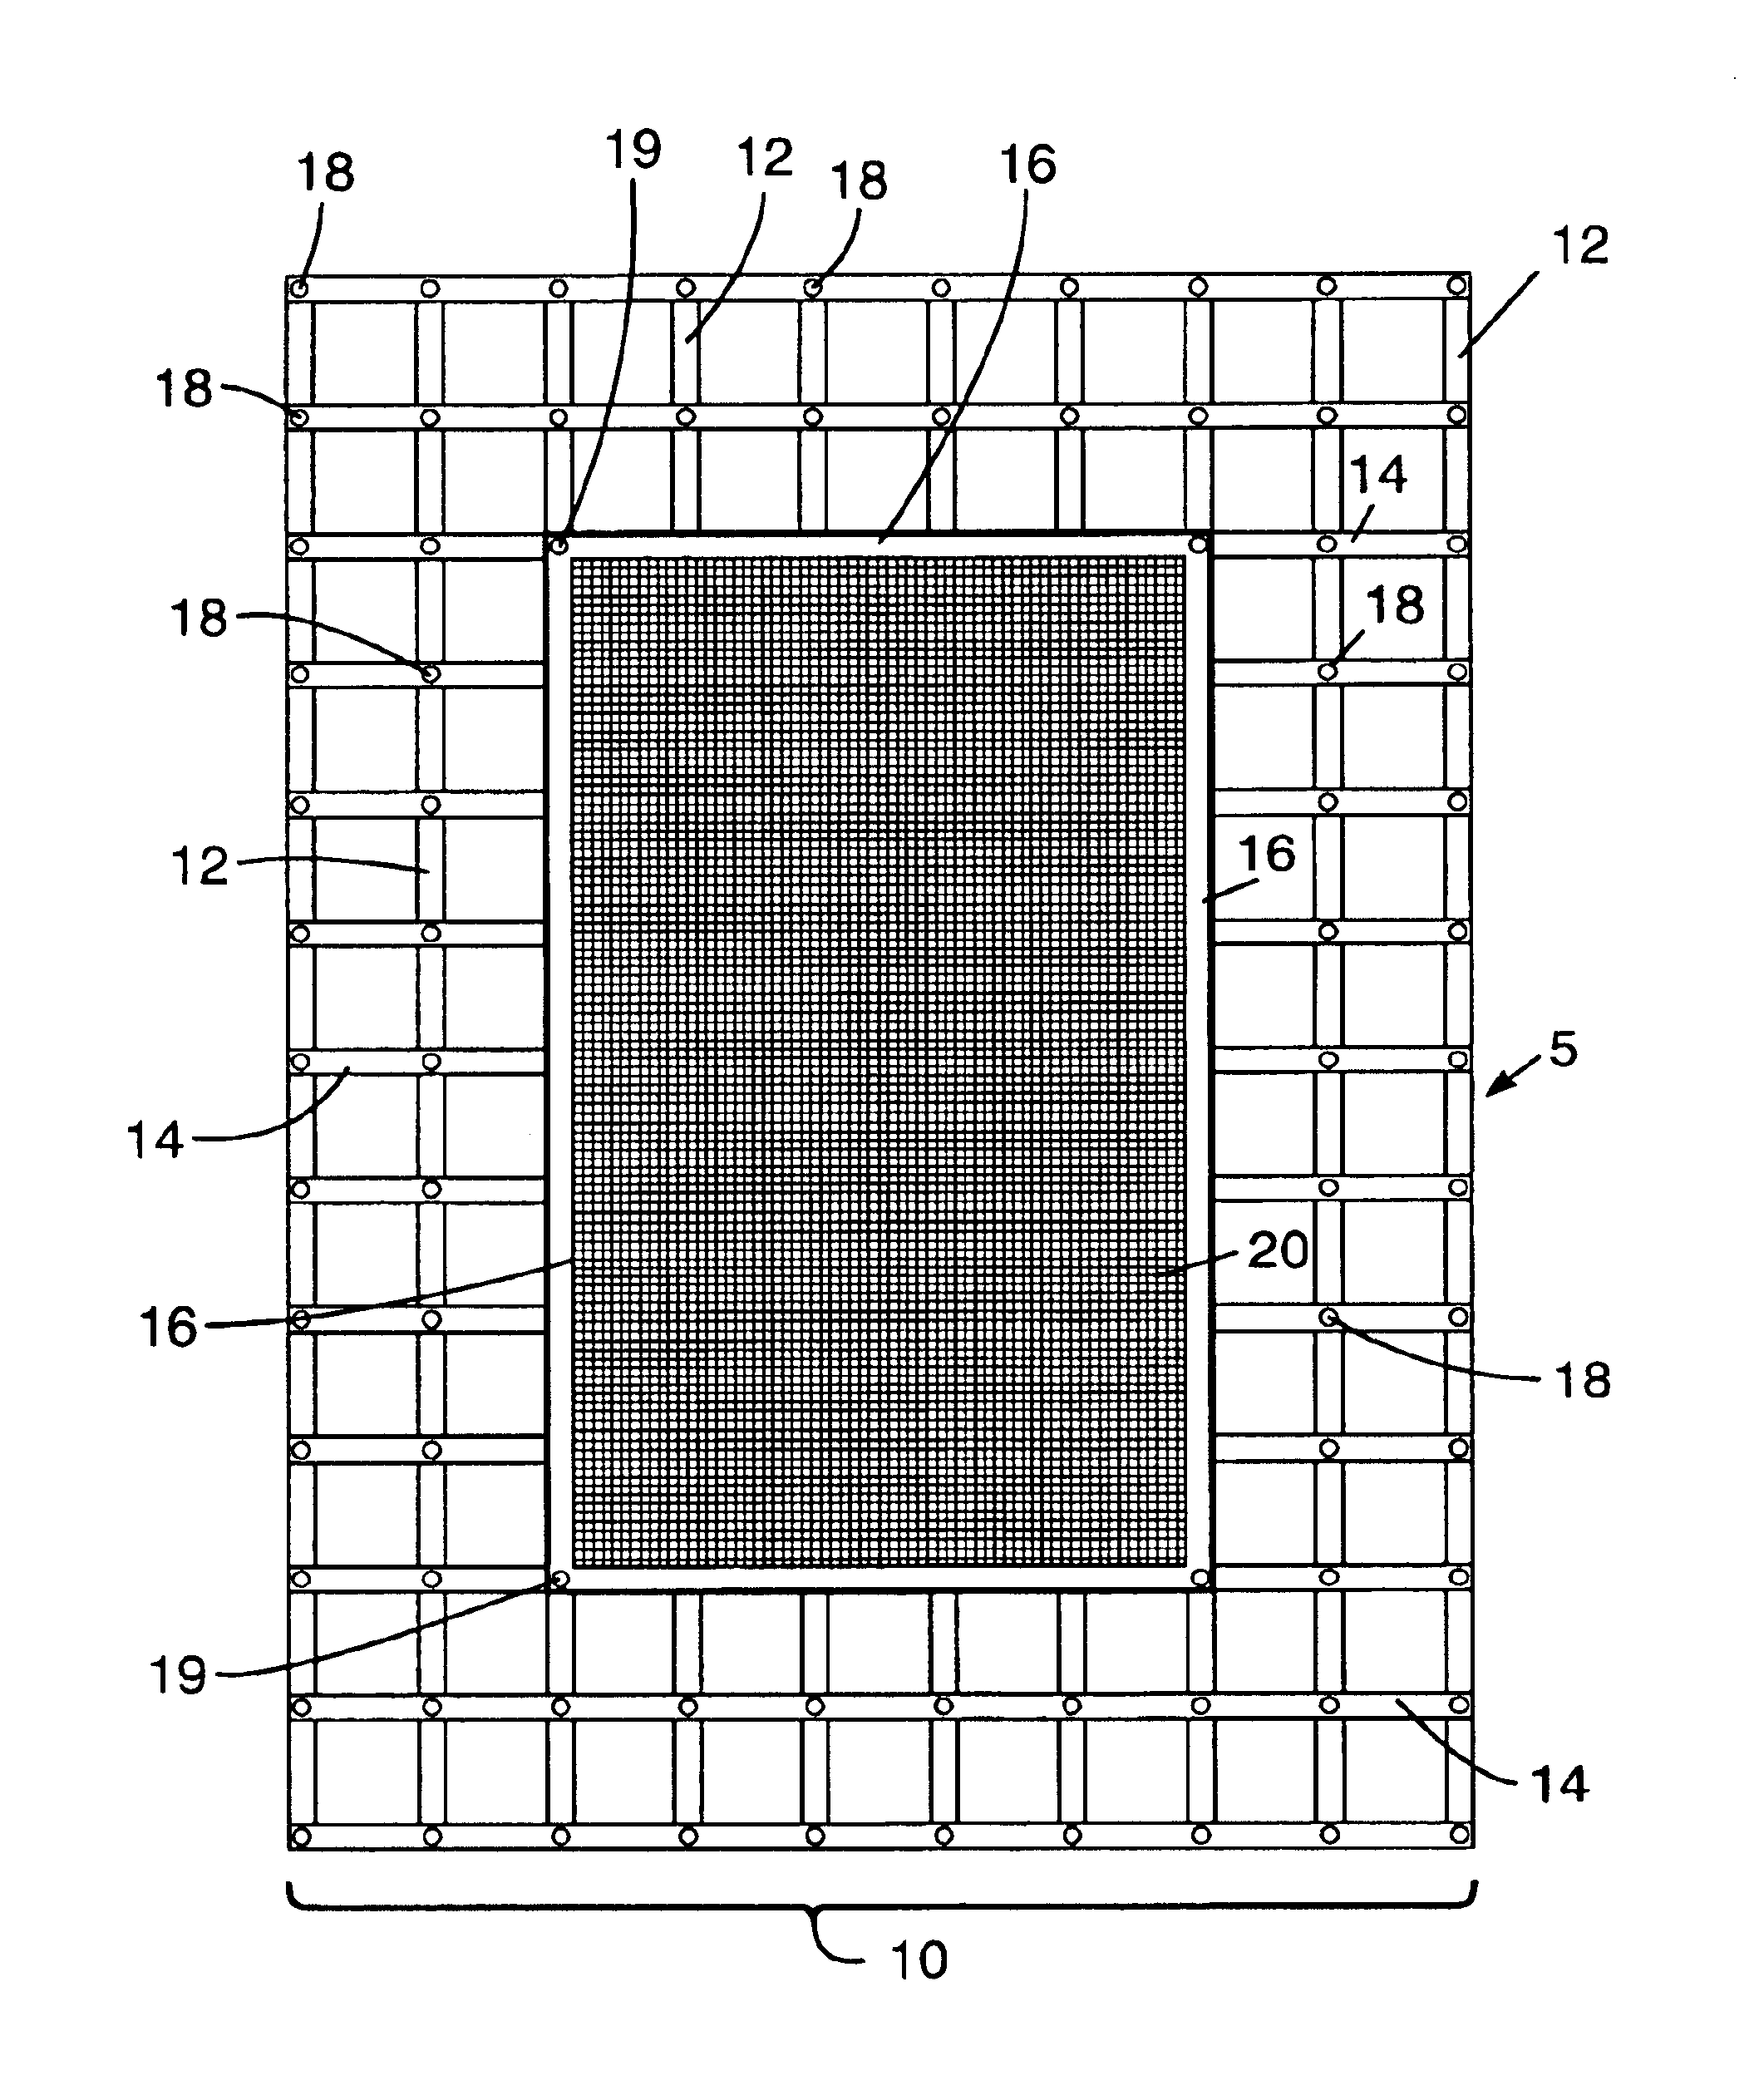 Cargo net/mesh tarp securing and sling device